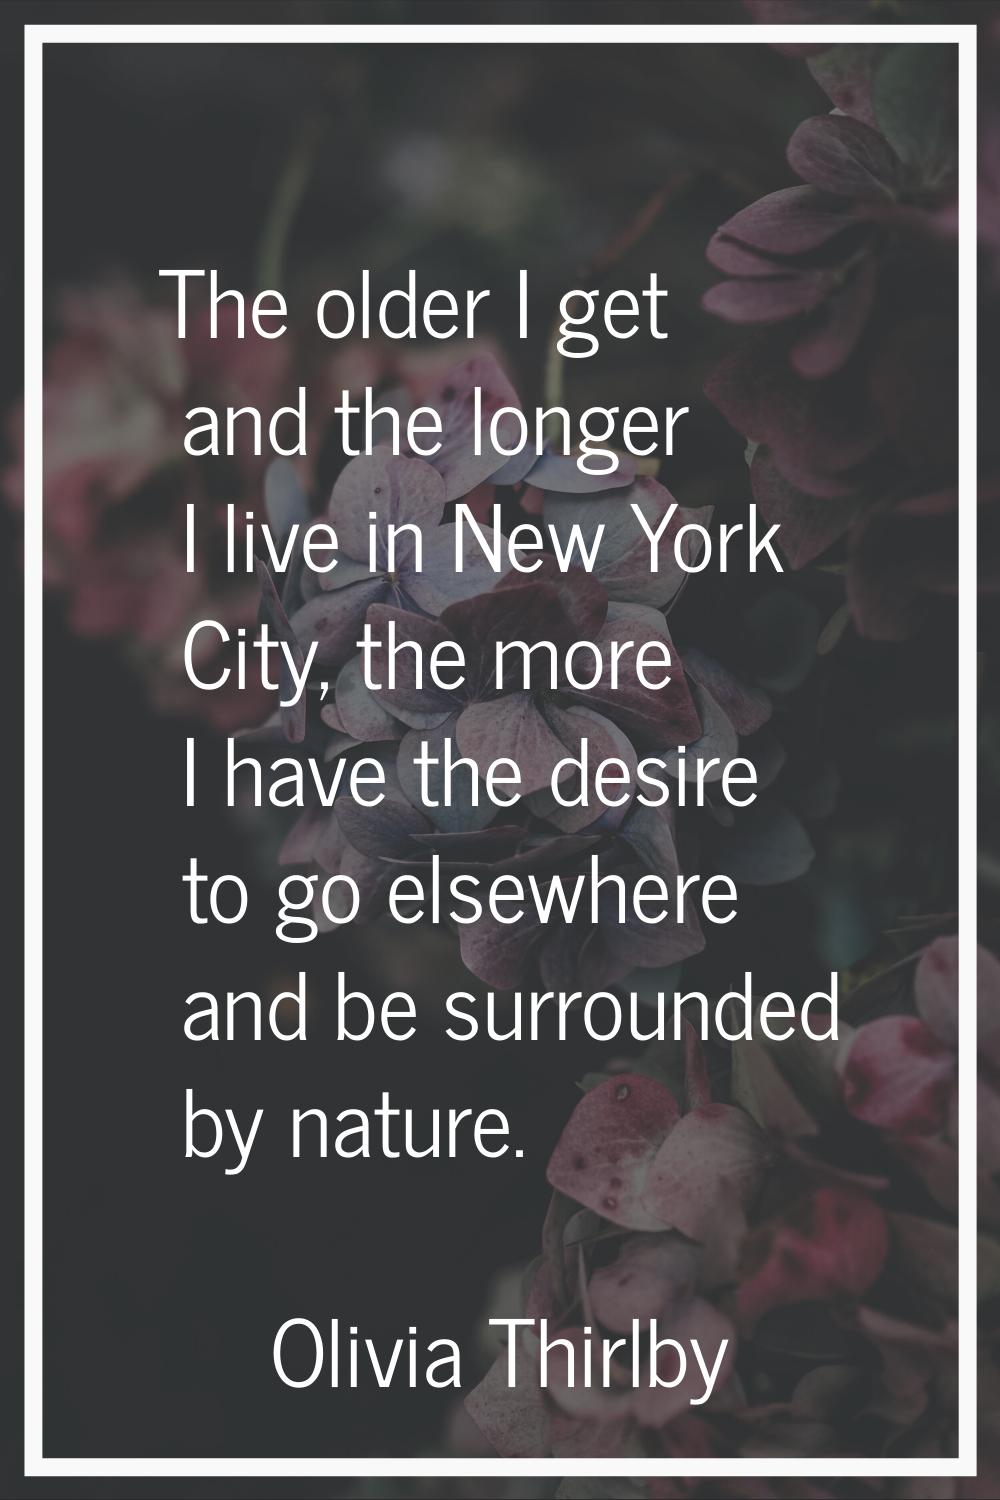 The older I get and the longer I live in New York City, the more I have the desire to go elsewhere 